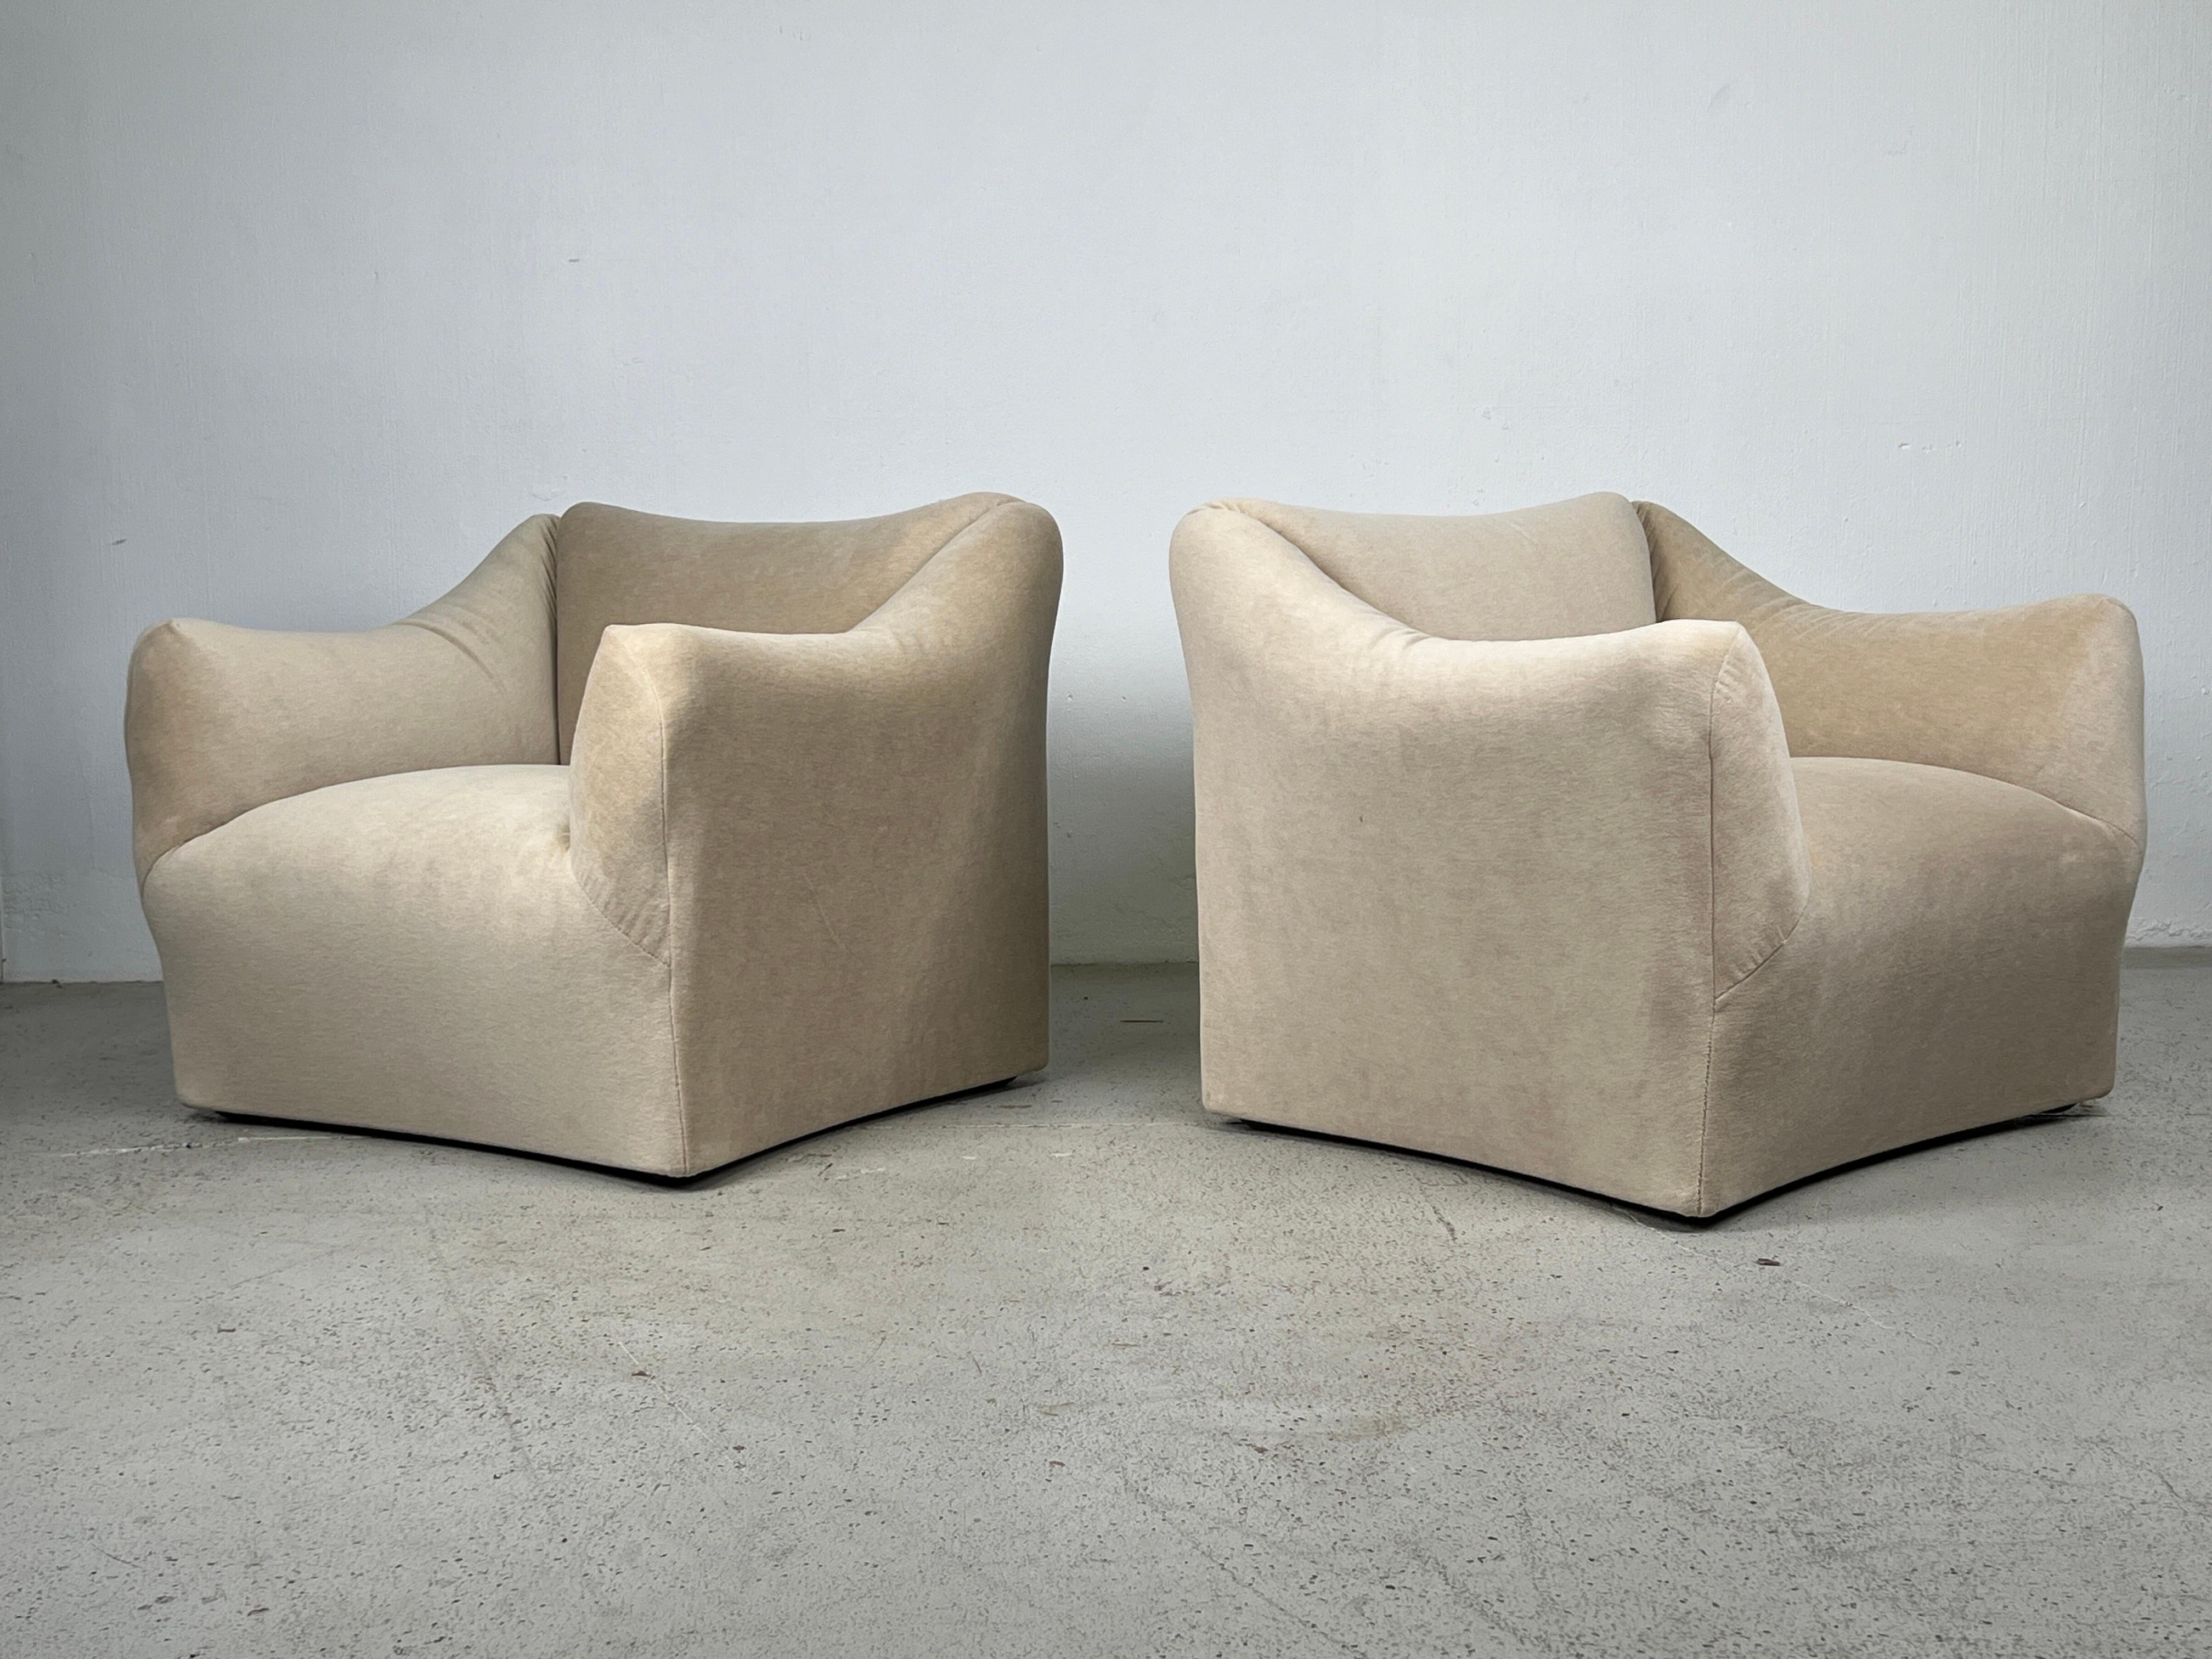 A pair of Tentazione lounge chairs in camel colored mohair by Mario Bellini for Cassina.